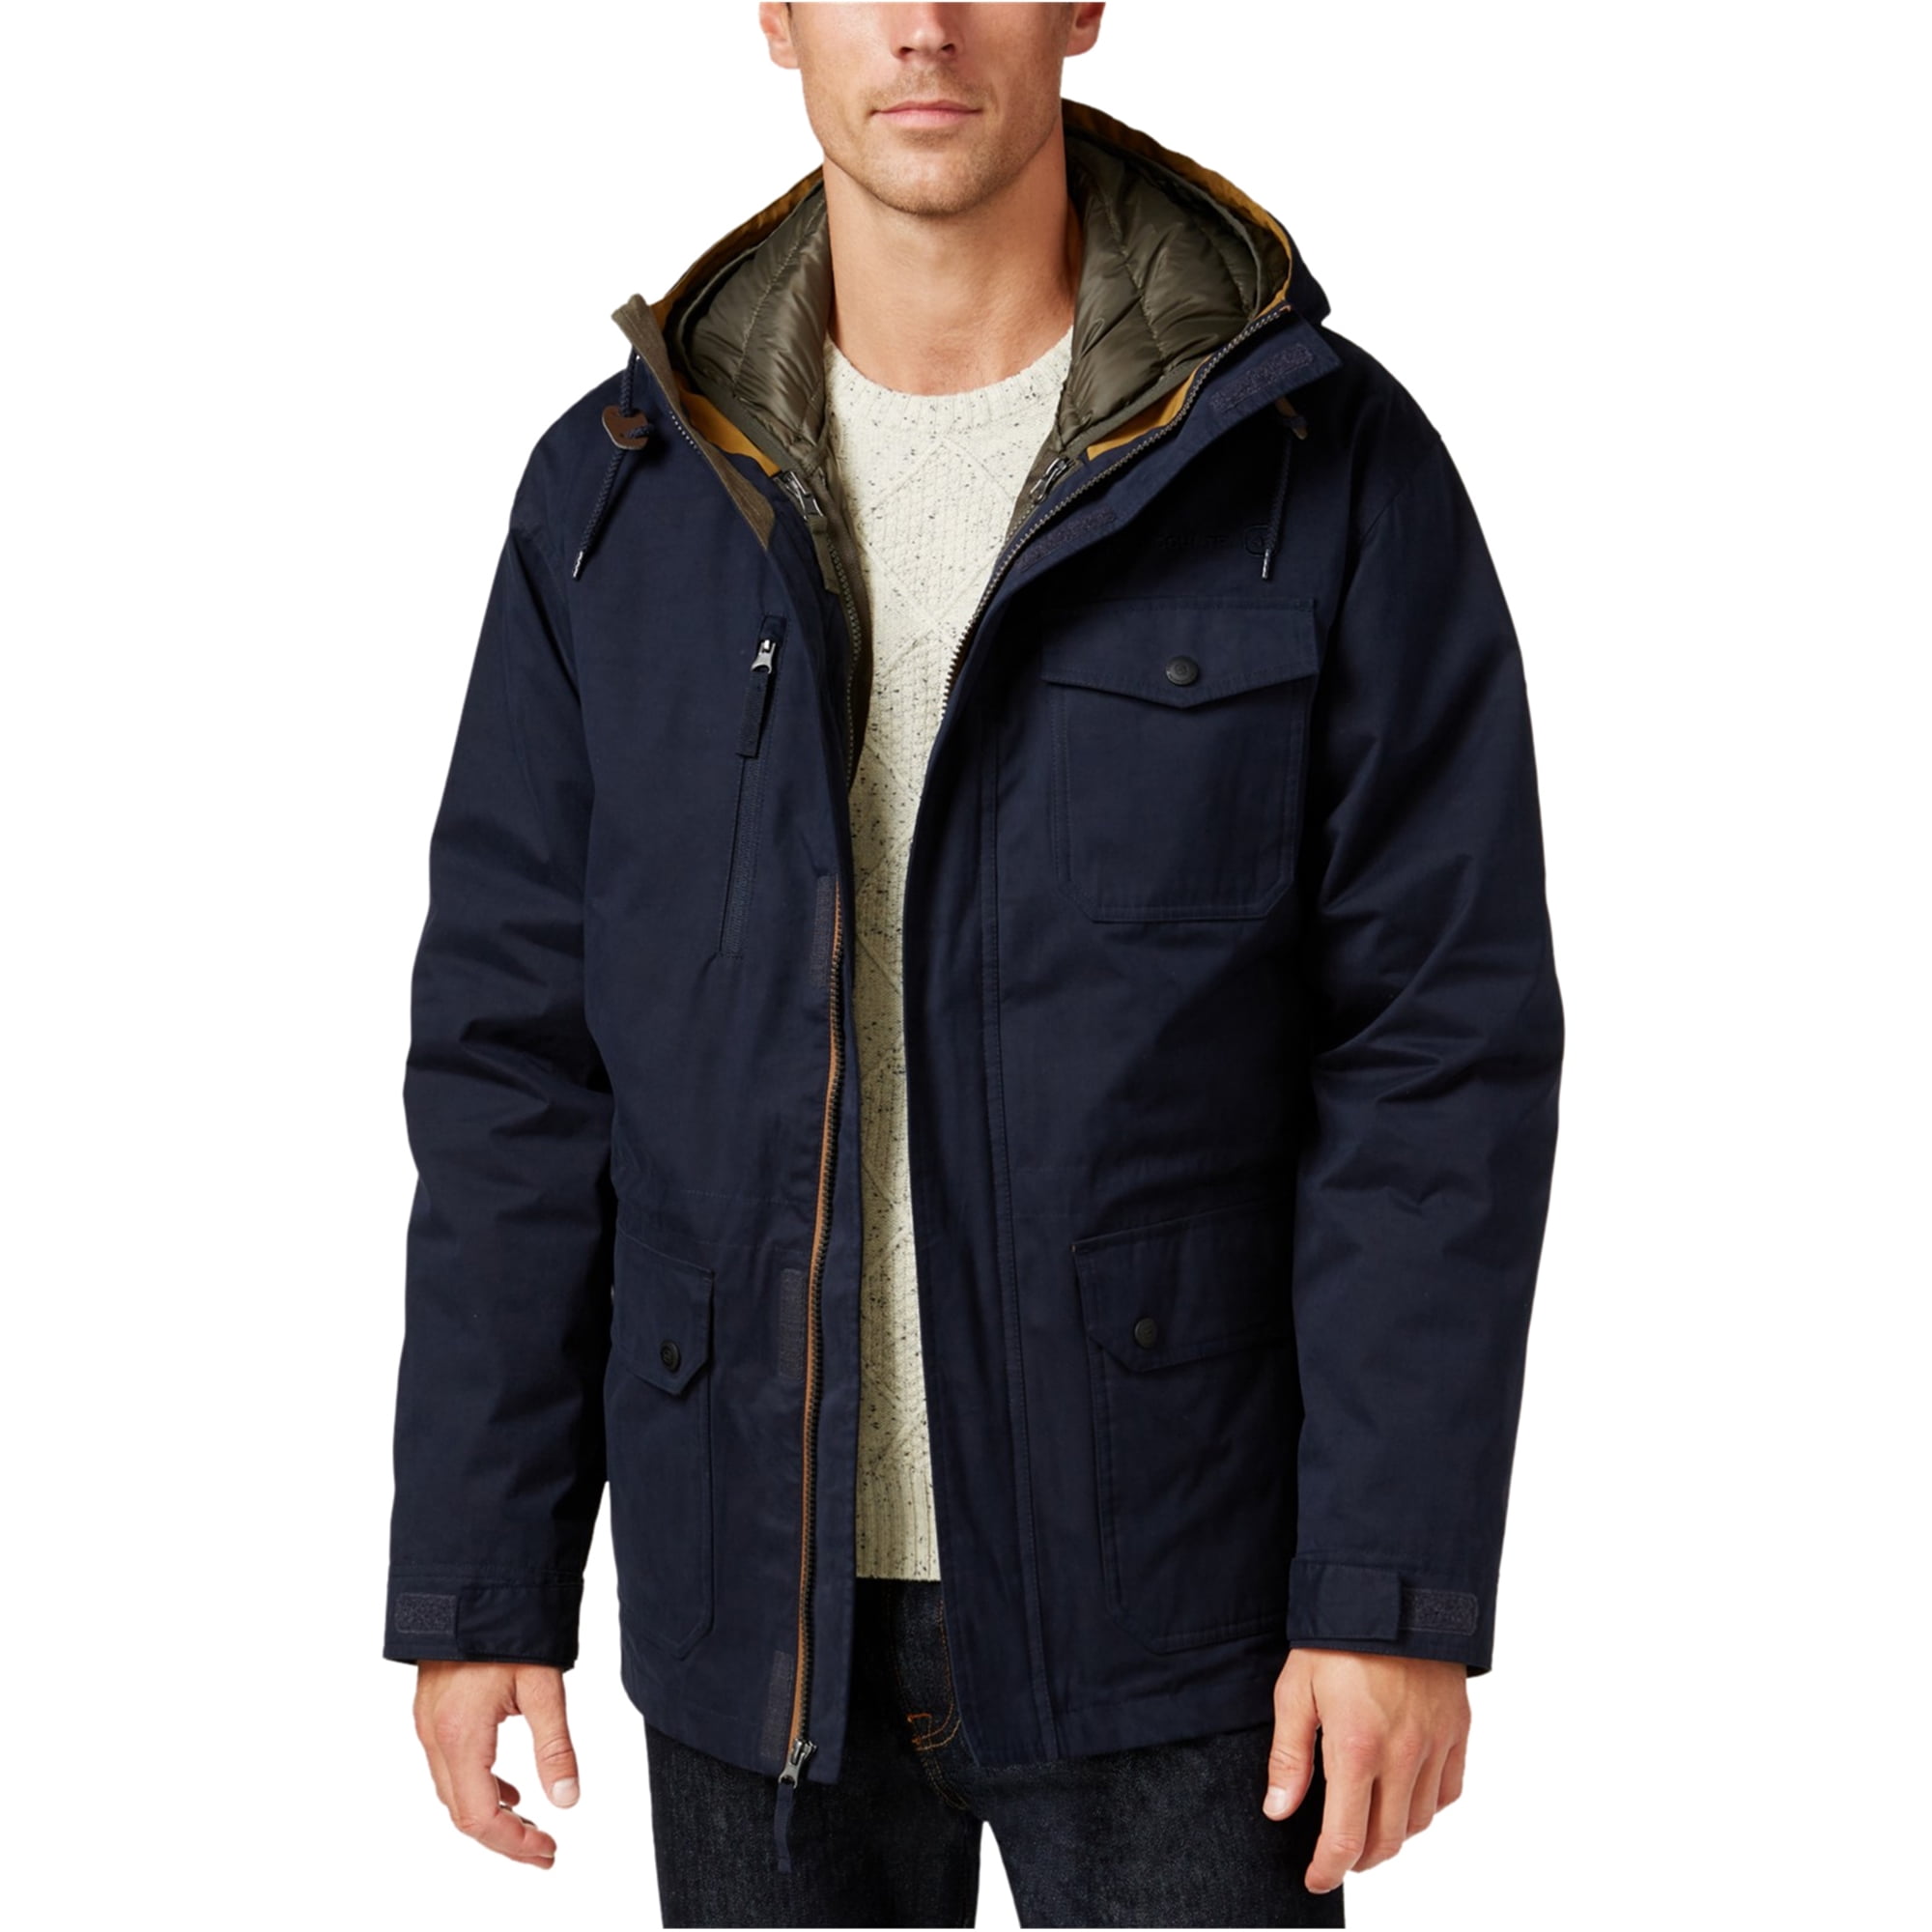 Free Country Mens Oxford Blend 3-in-1 Down Jacket, Blue, Medium ...